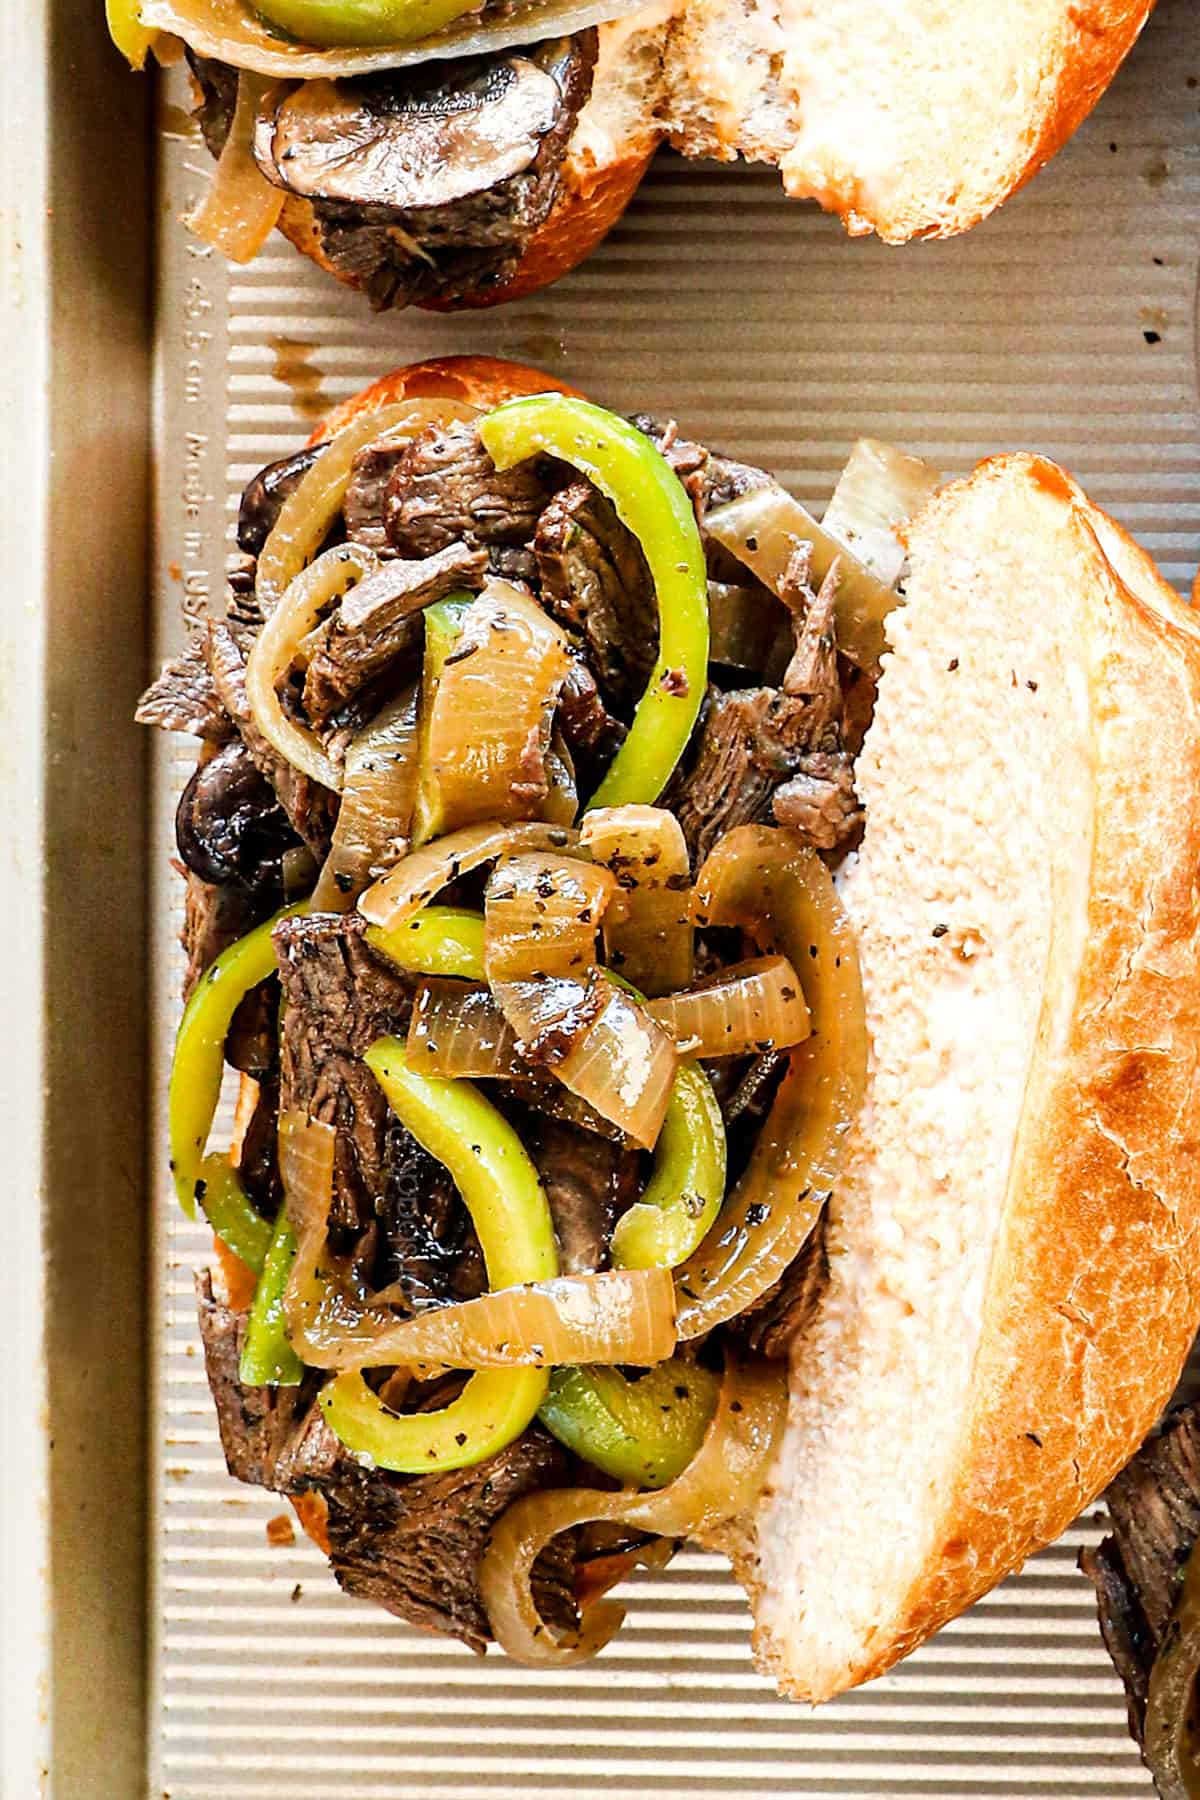 showing how to make Crockpot Philly cheesesteak recipe by adding sliced steak, bell peppers, onions, and mushrooms to a toasted hoagie bun before adding cheese